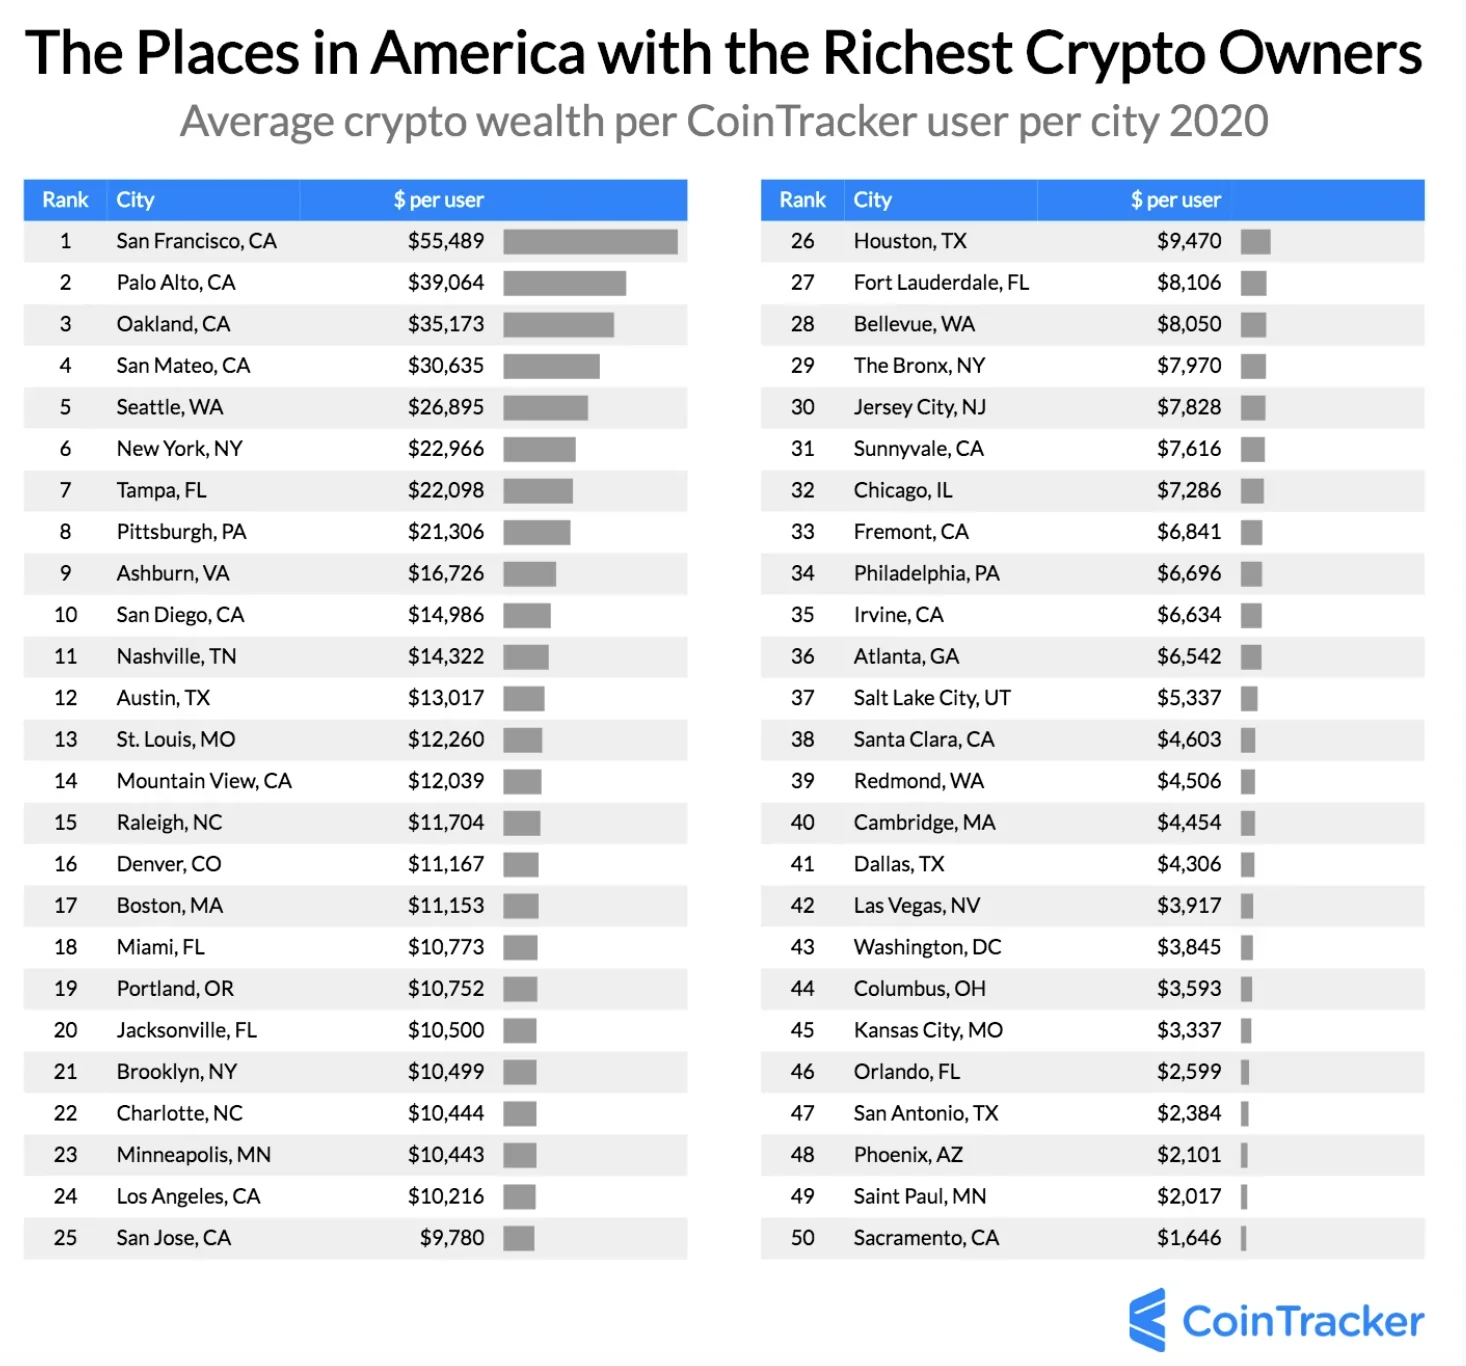 US cities with the richest crypto owners